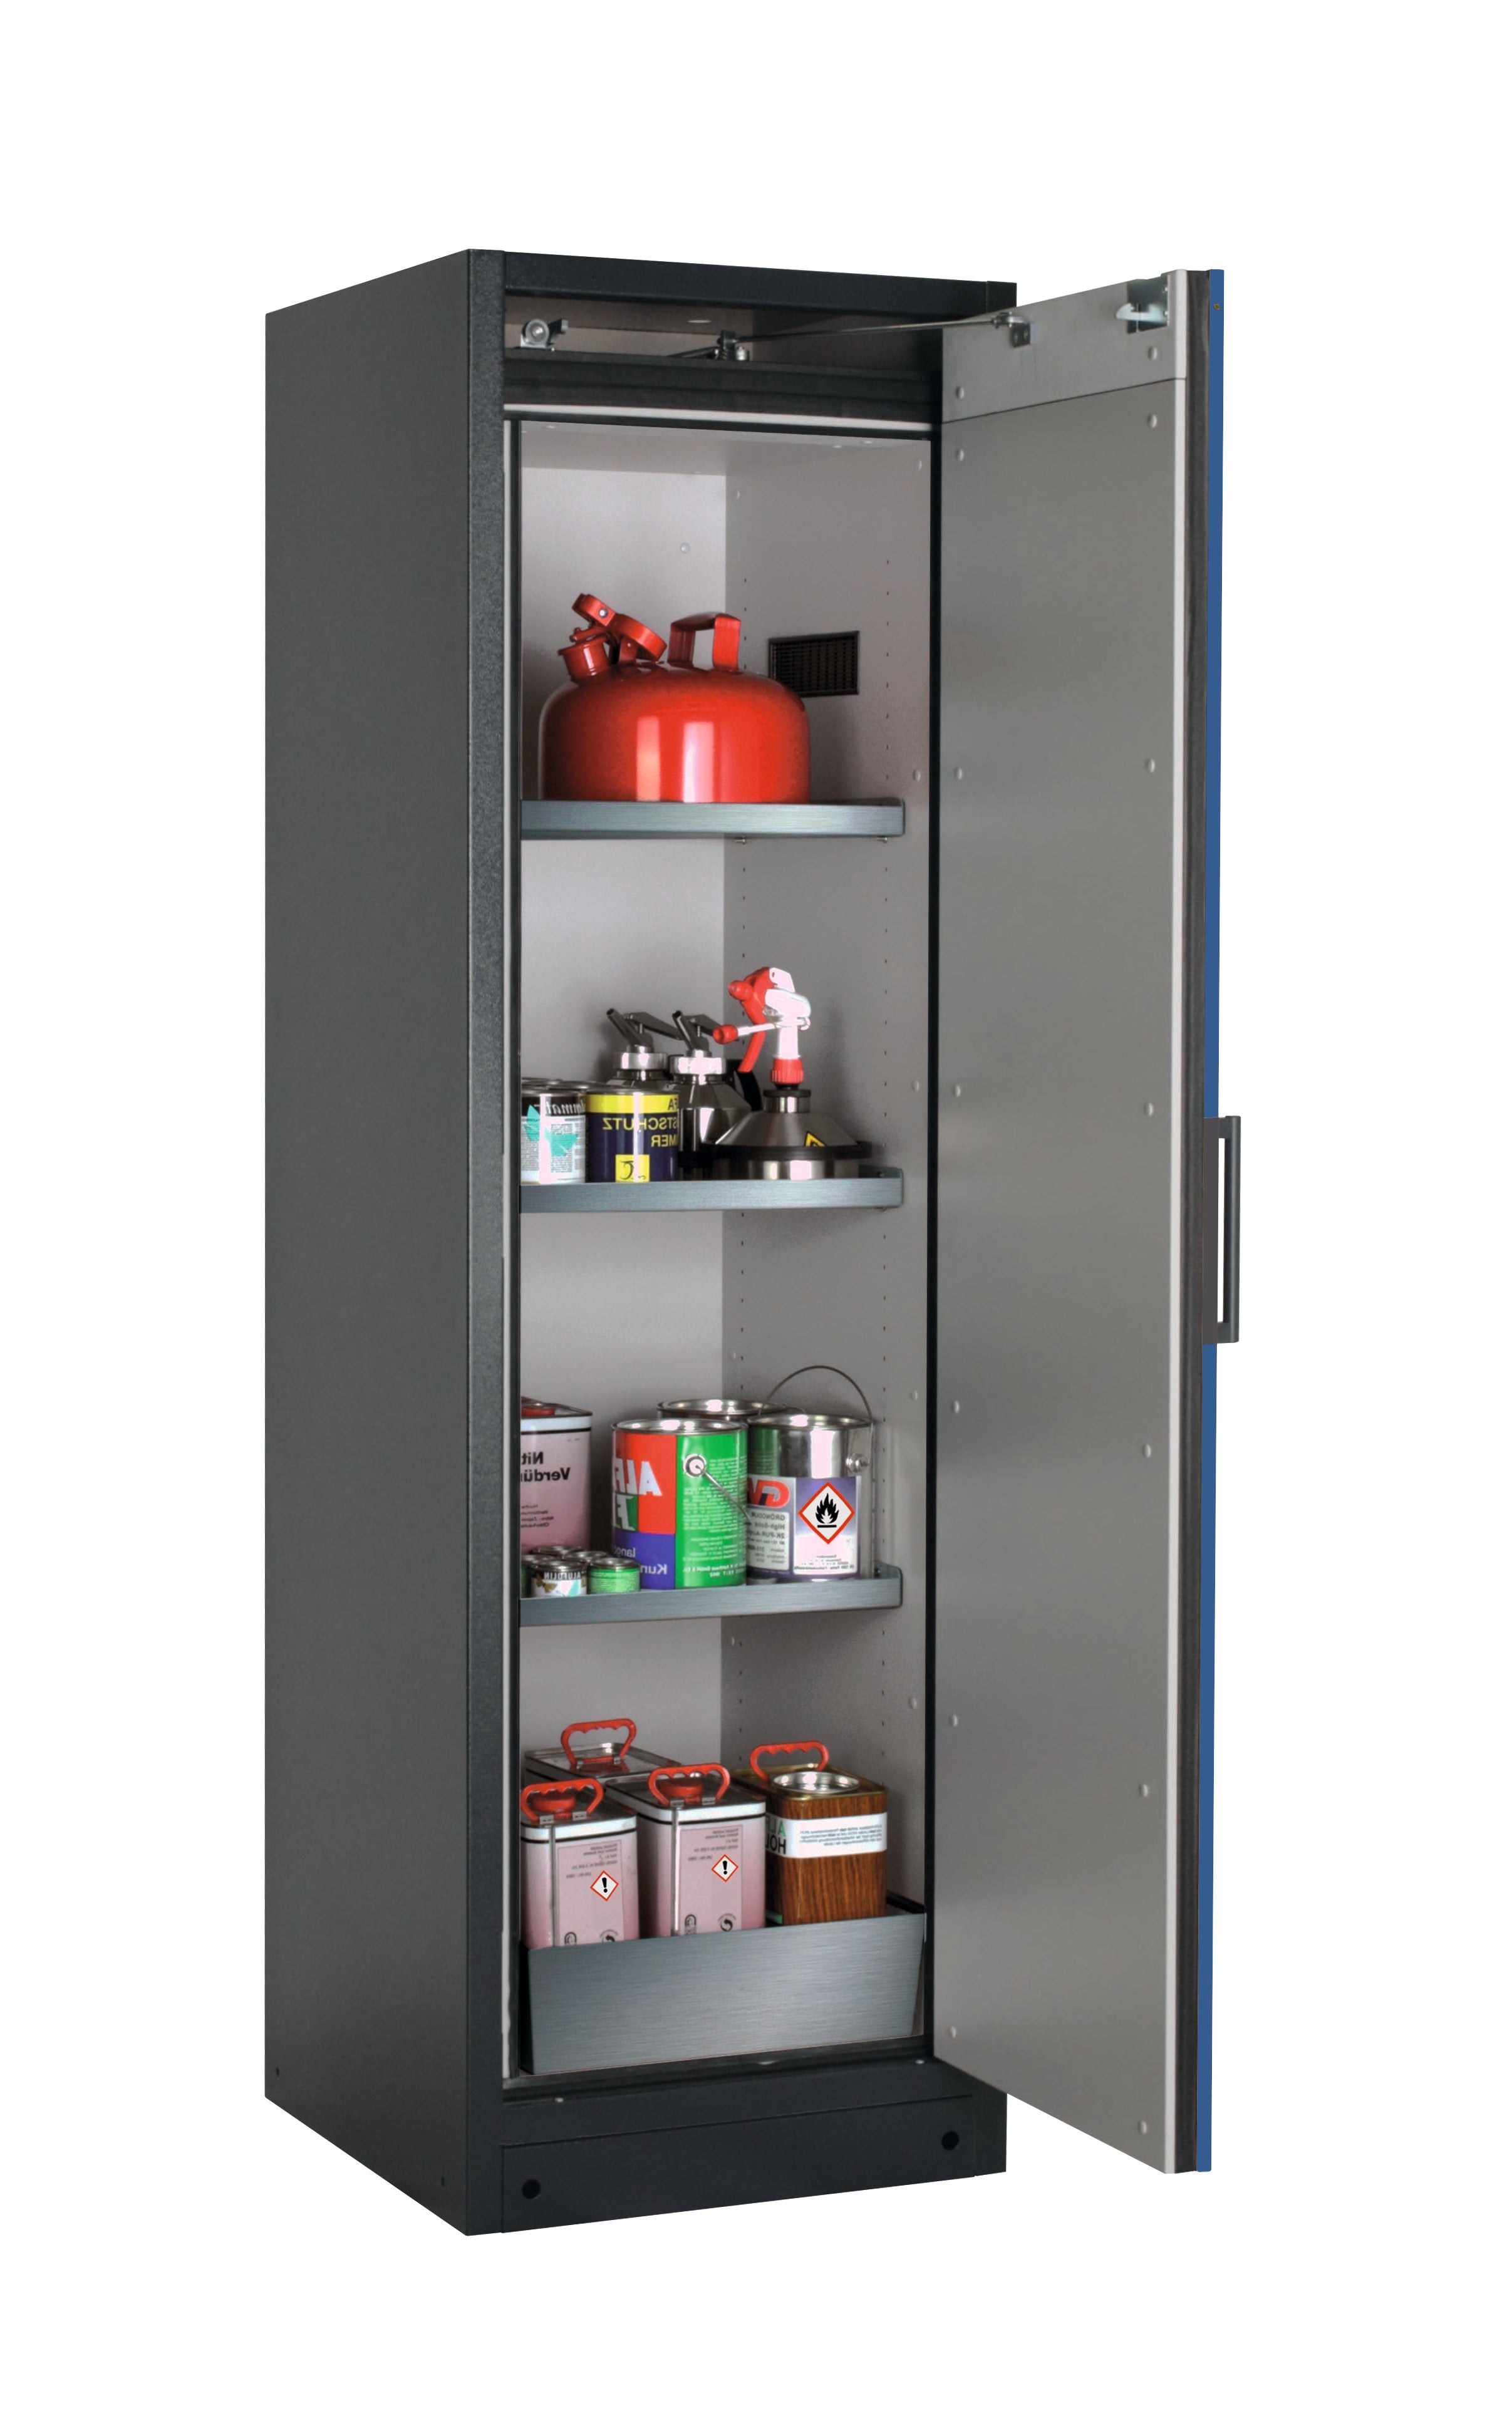 Type 90 safety storage cabinet Q-PEGASUS-90 model Q90.195.060.WDACR in gentian blue RAL 5010 with 3x shelf standard (stainless steel 1.4301),